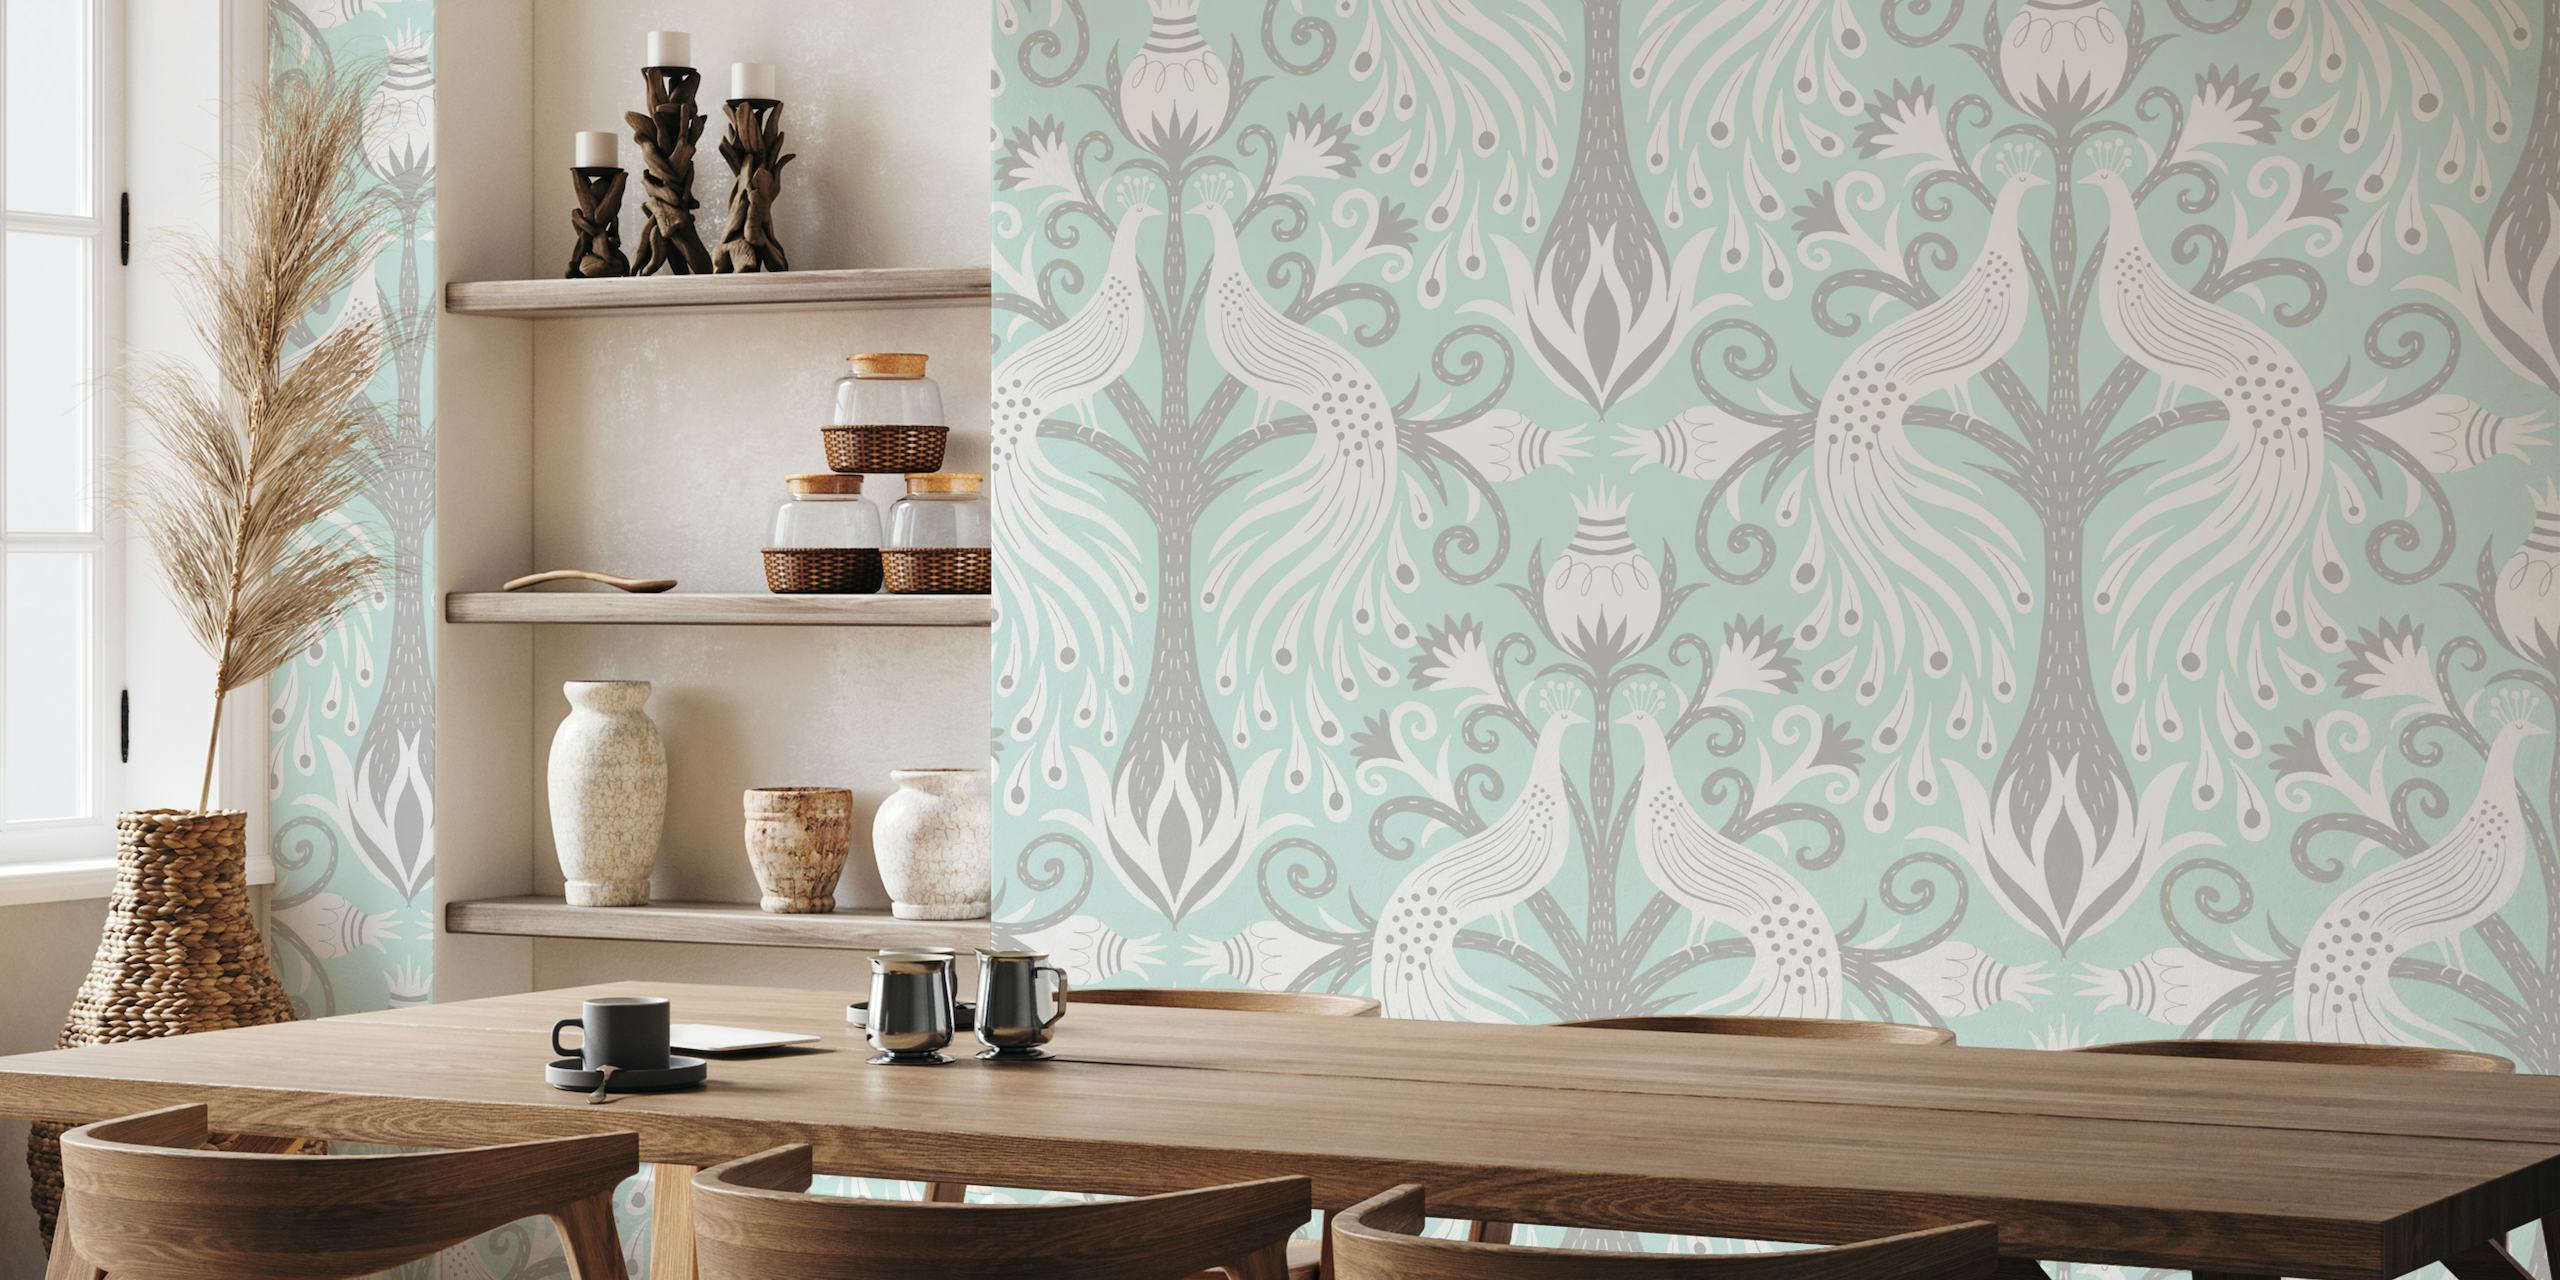 White peacock pair with damask patterns on a light blue background wall mural